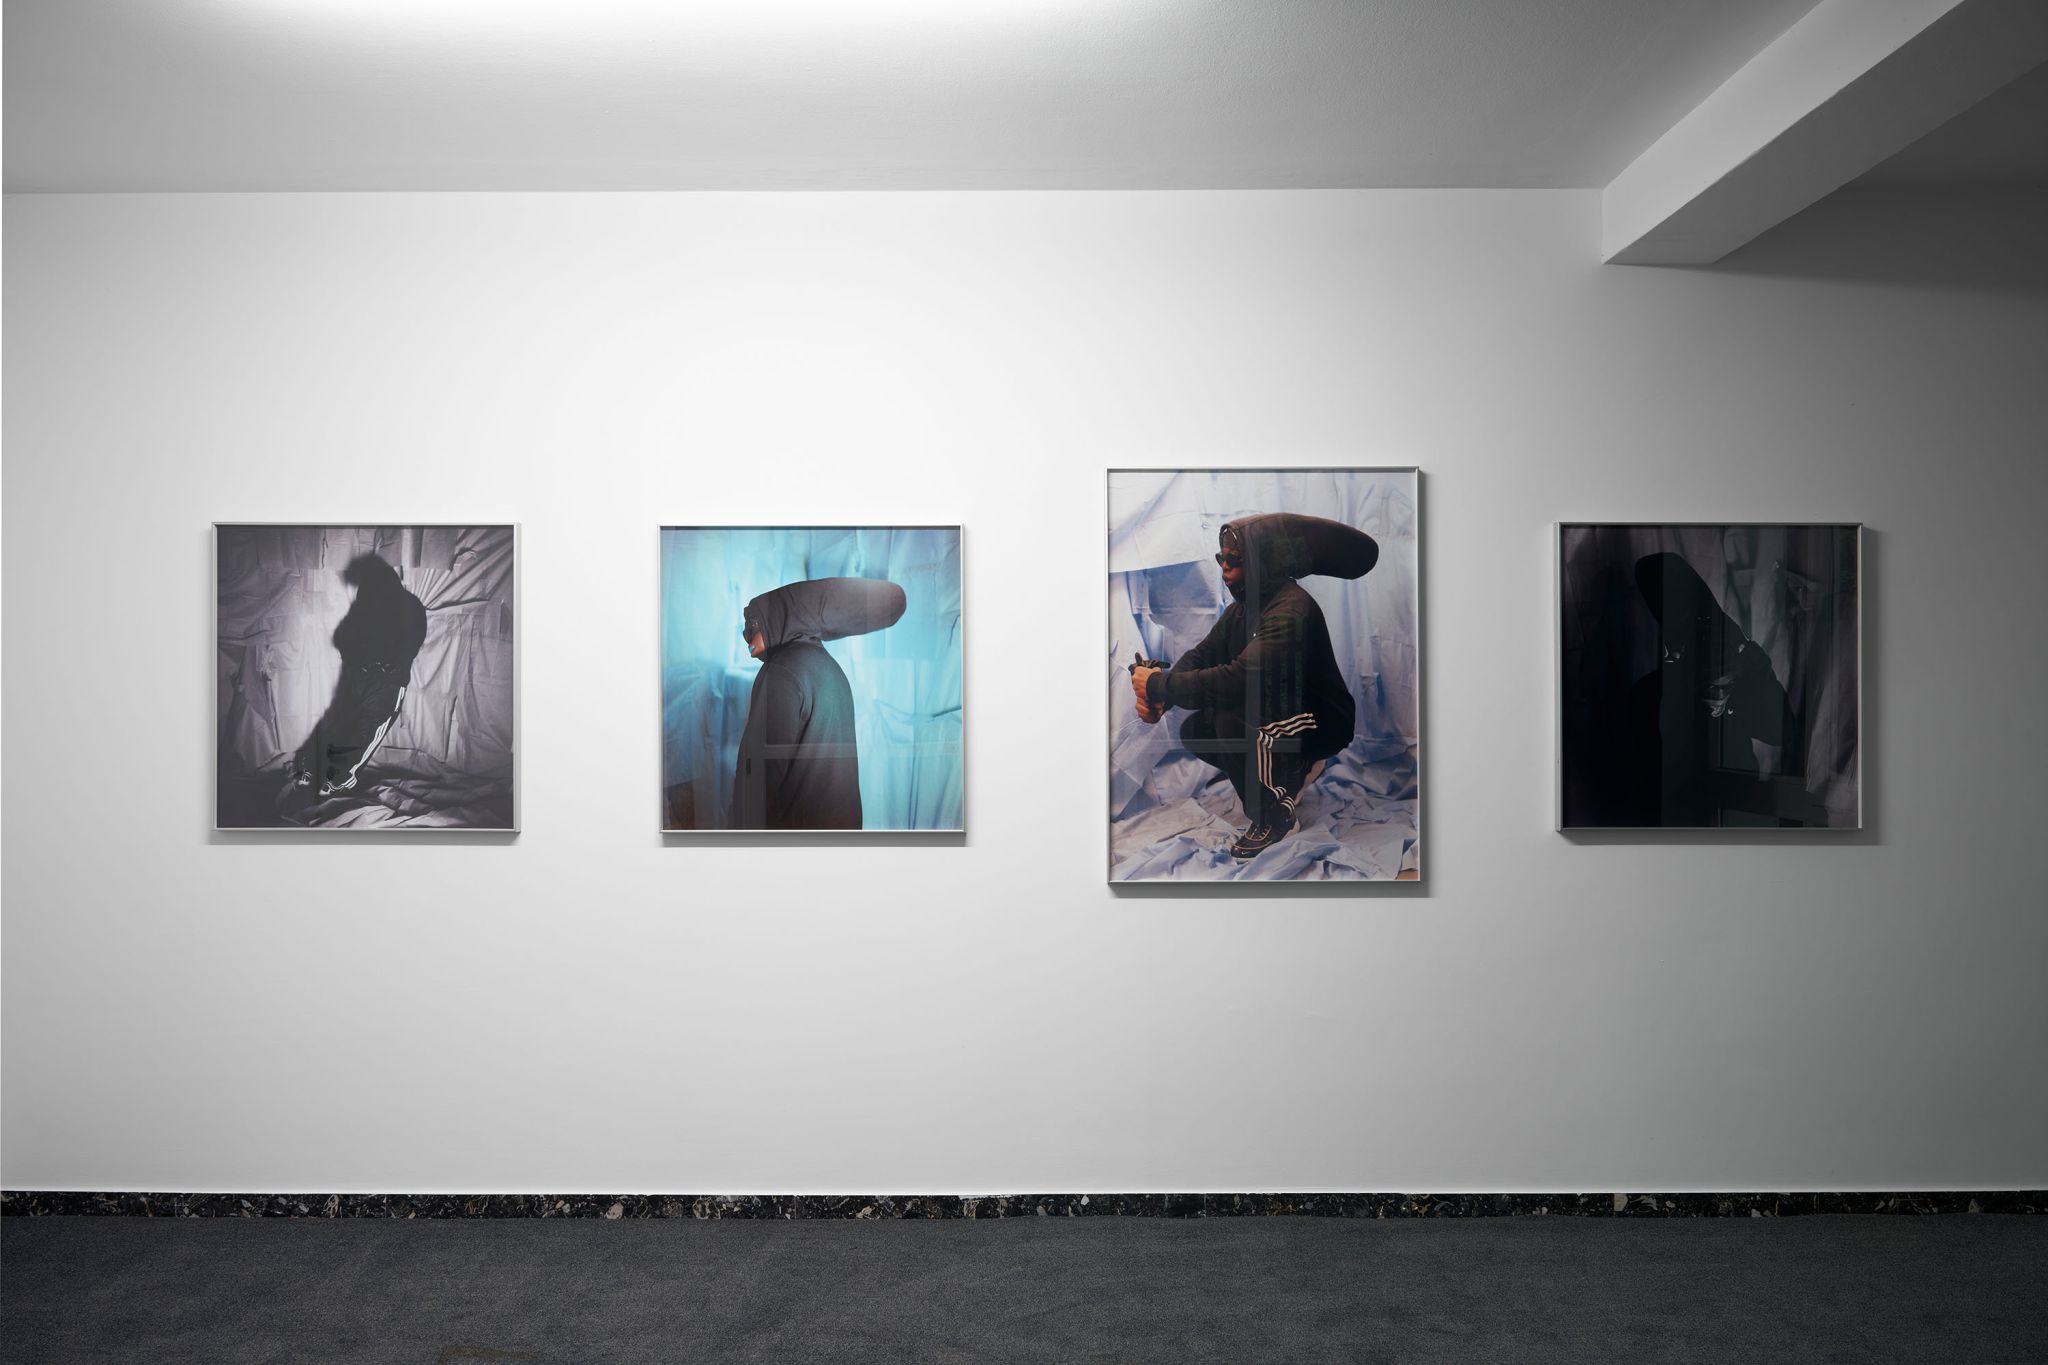 Installation view, The exhibition formerly known as “trace image”, Deborah Schamoni, 2022